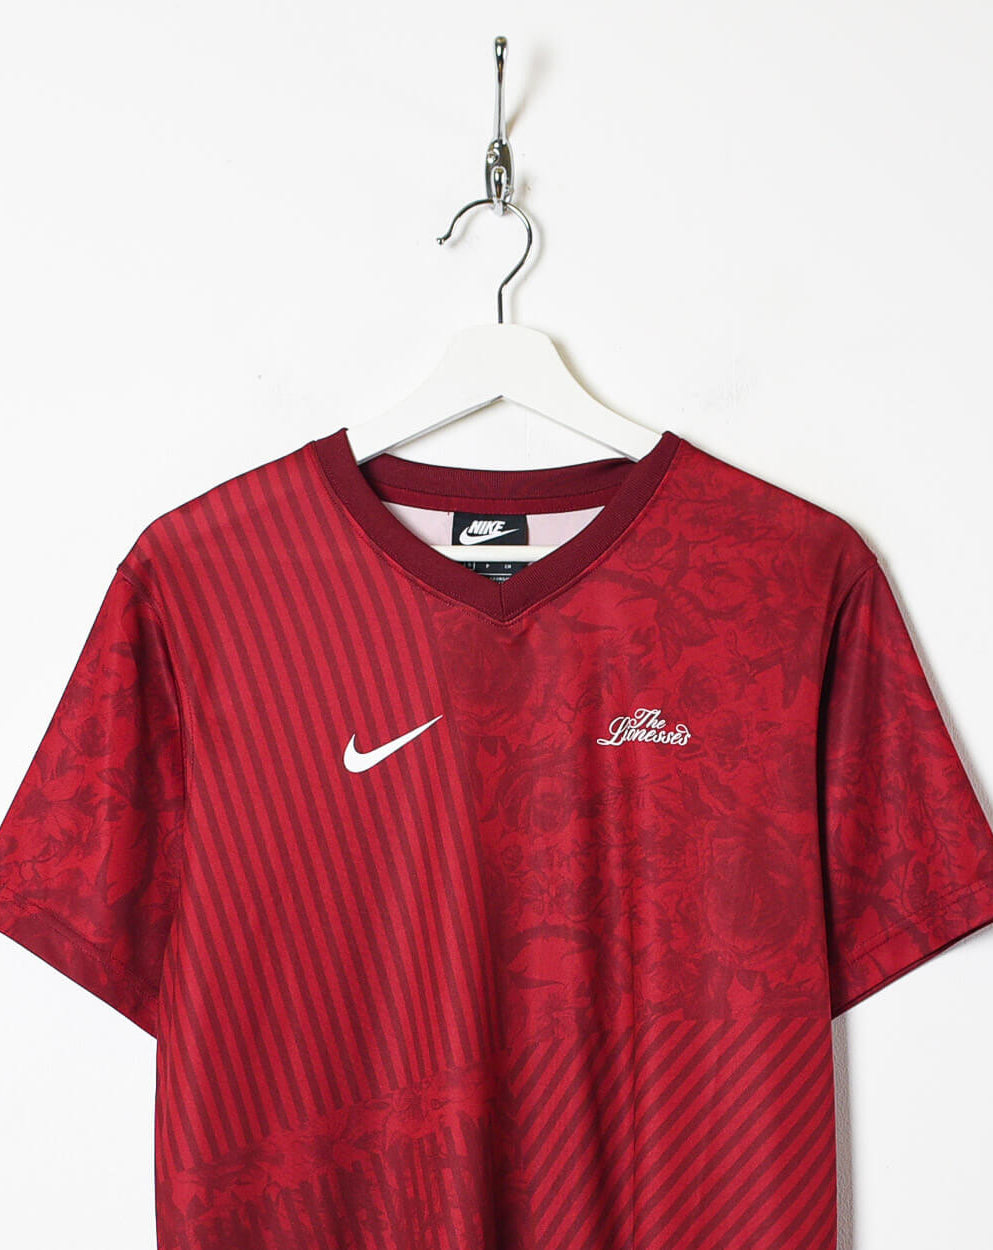 Maroon Nike 2020 England The Lionesses Shirt Dress - Small women's